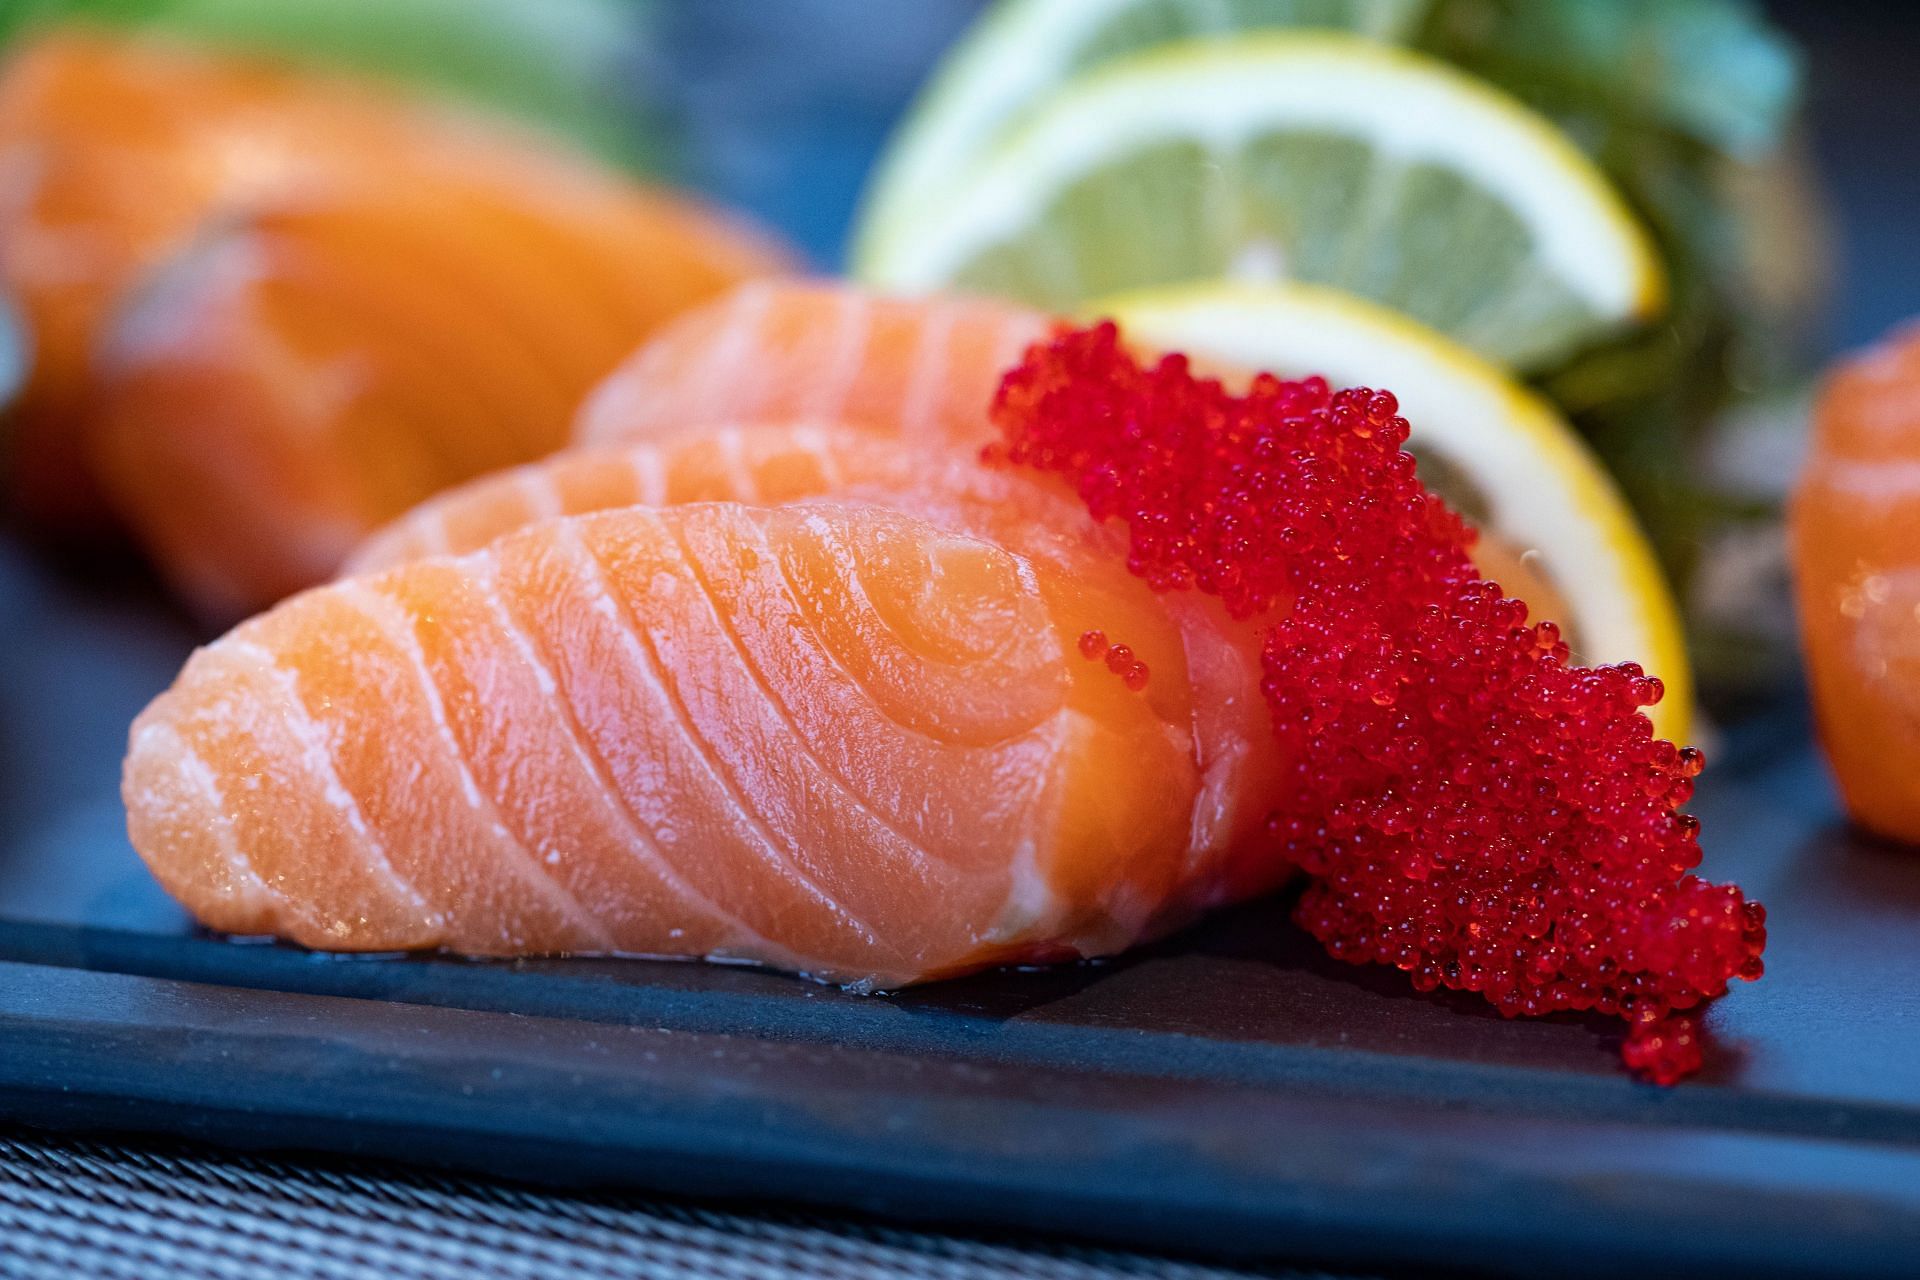 Fish is a great low calorie protein source. (Image via Pexels/Valeria Boltneva)